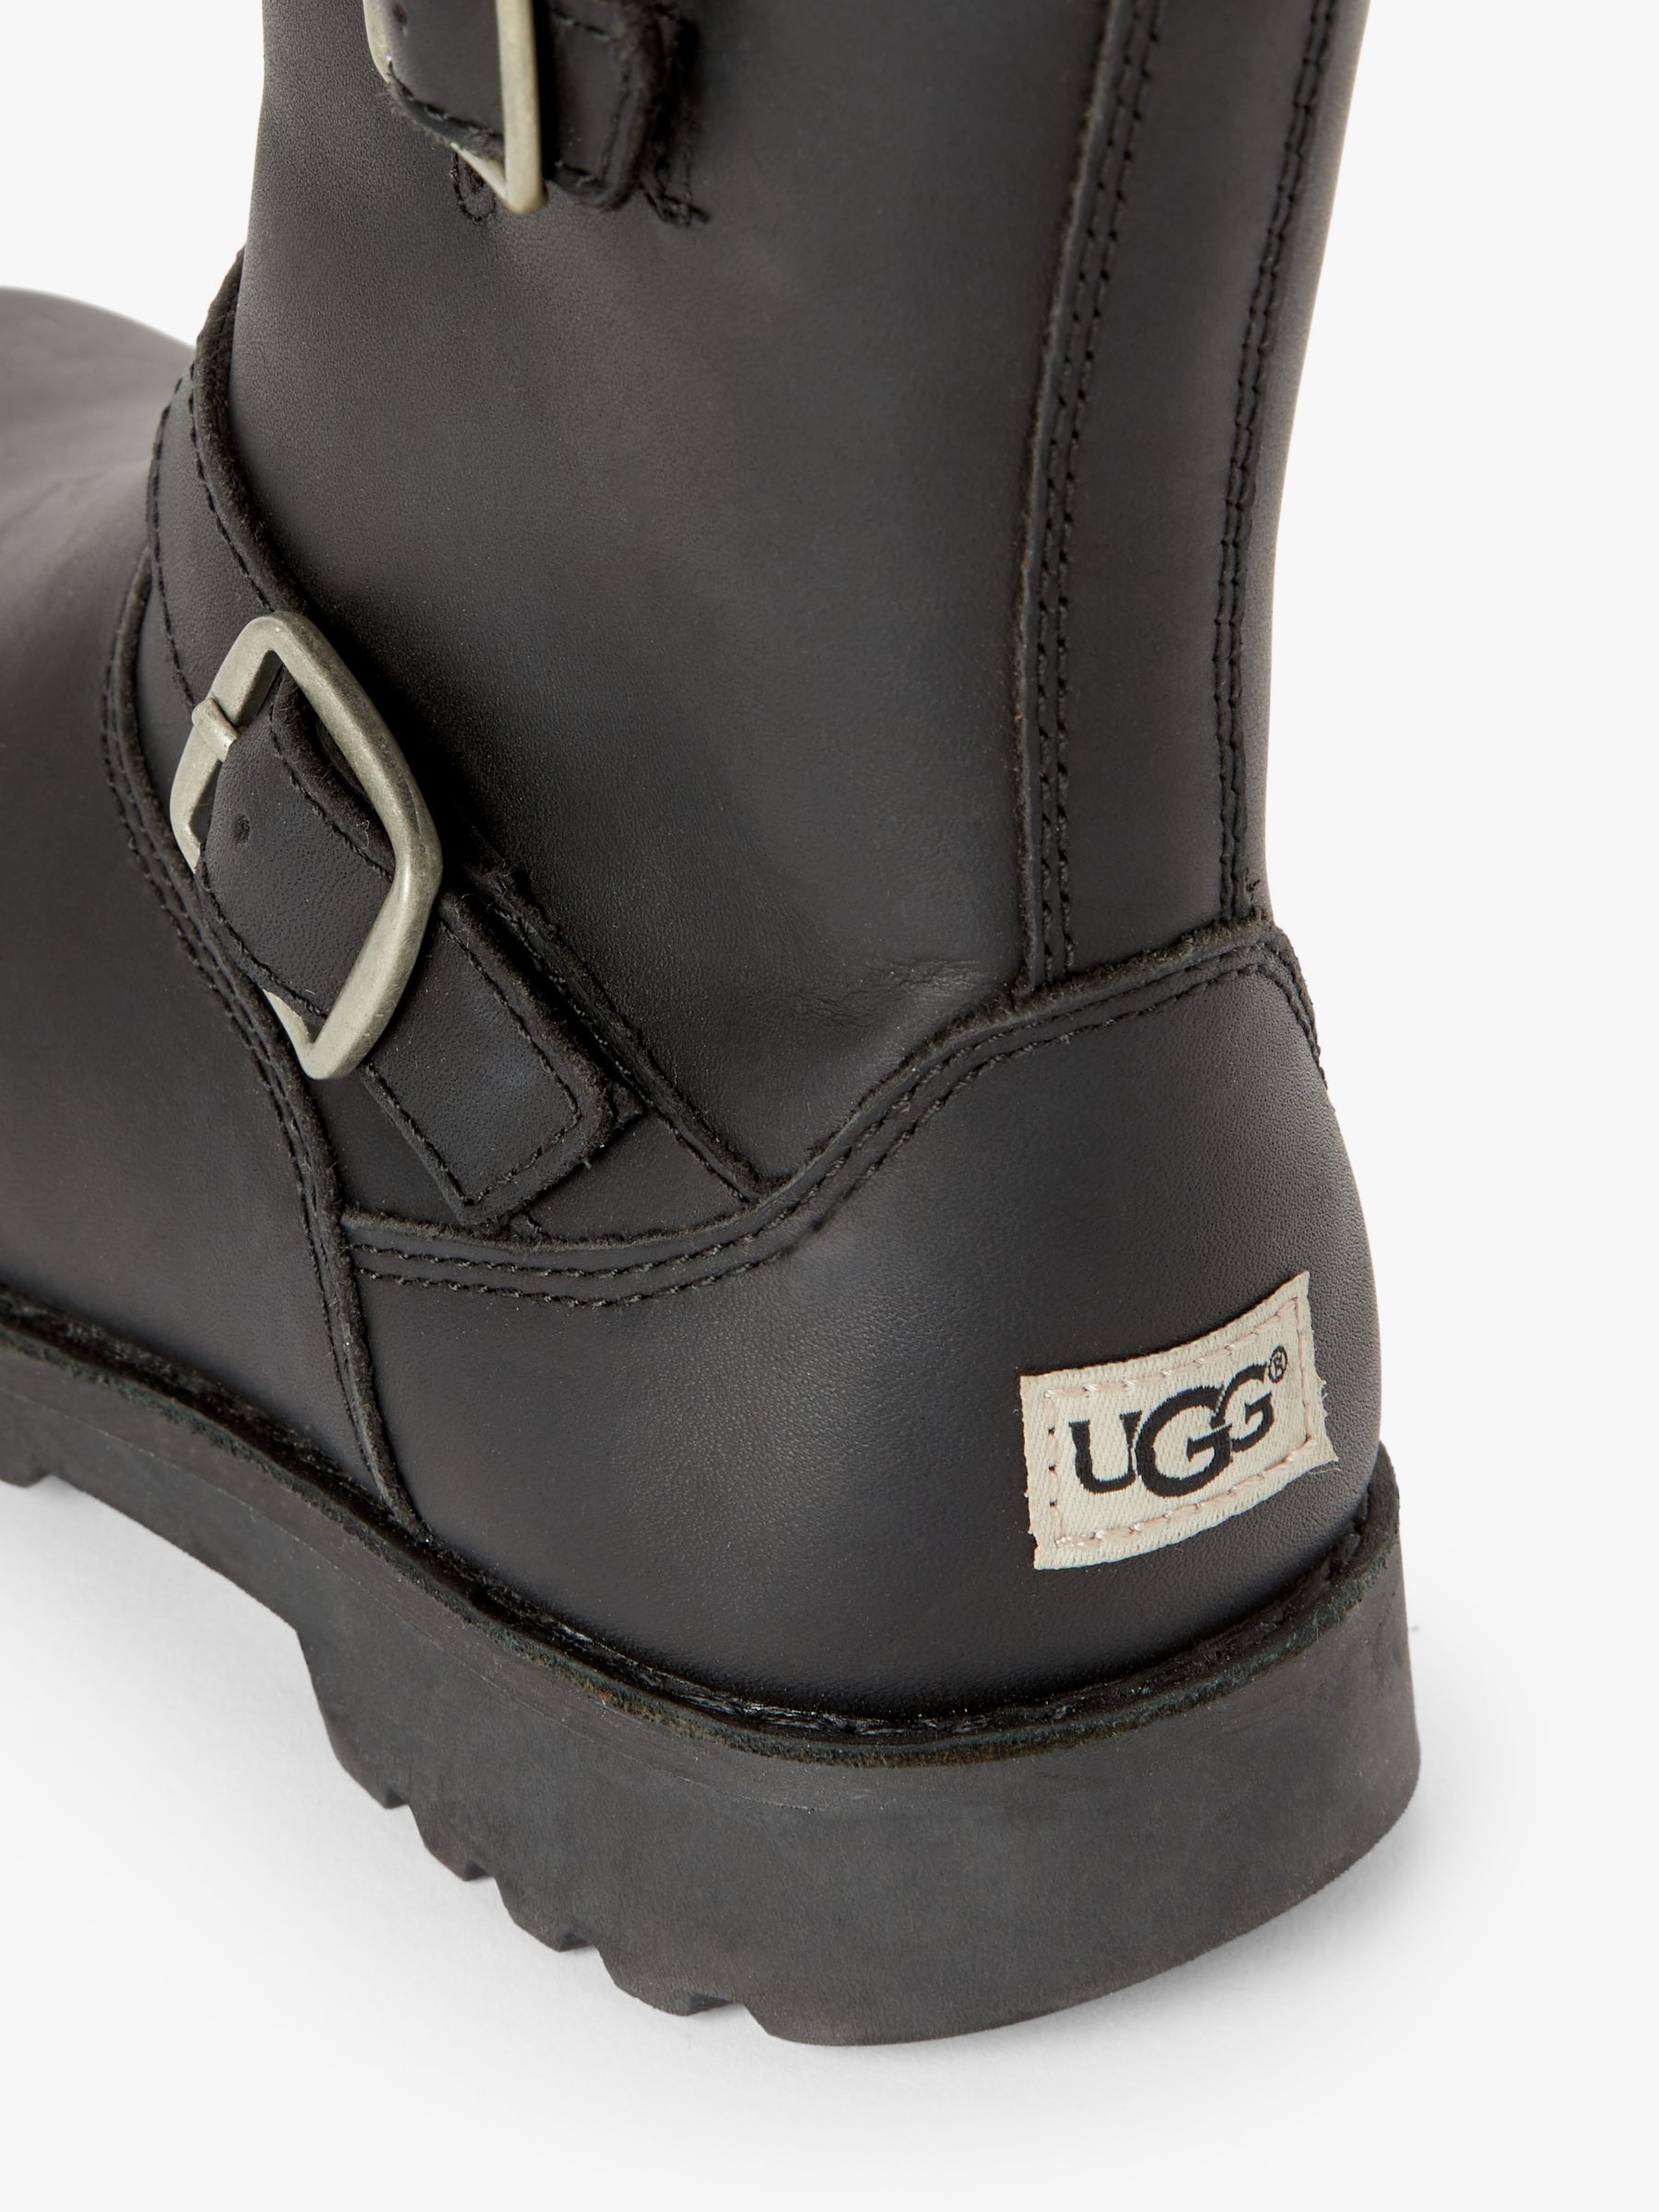 leather ugg boots